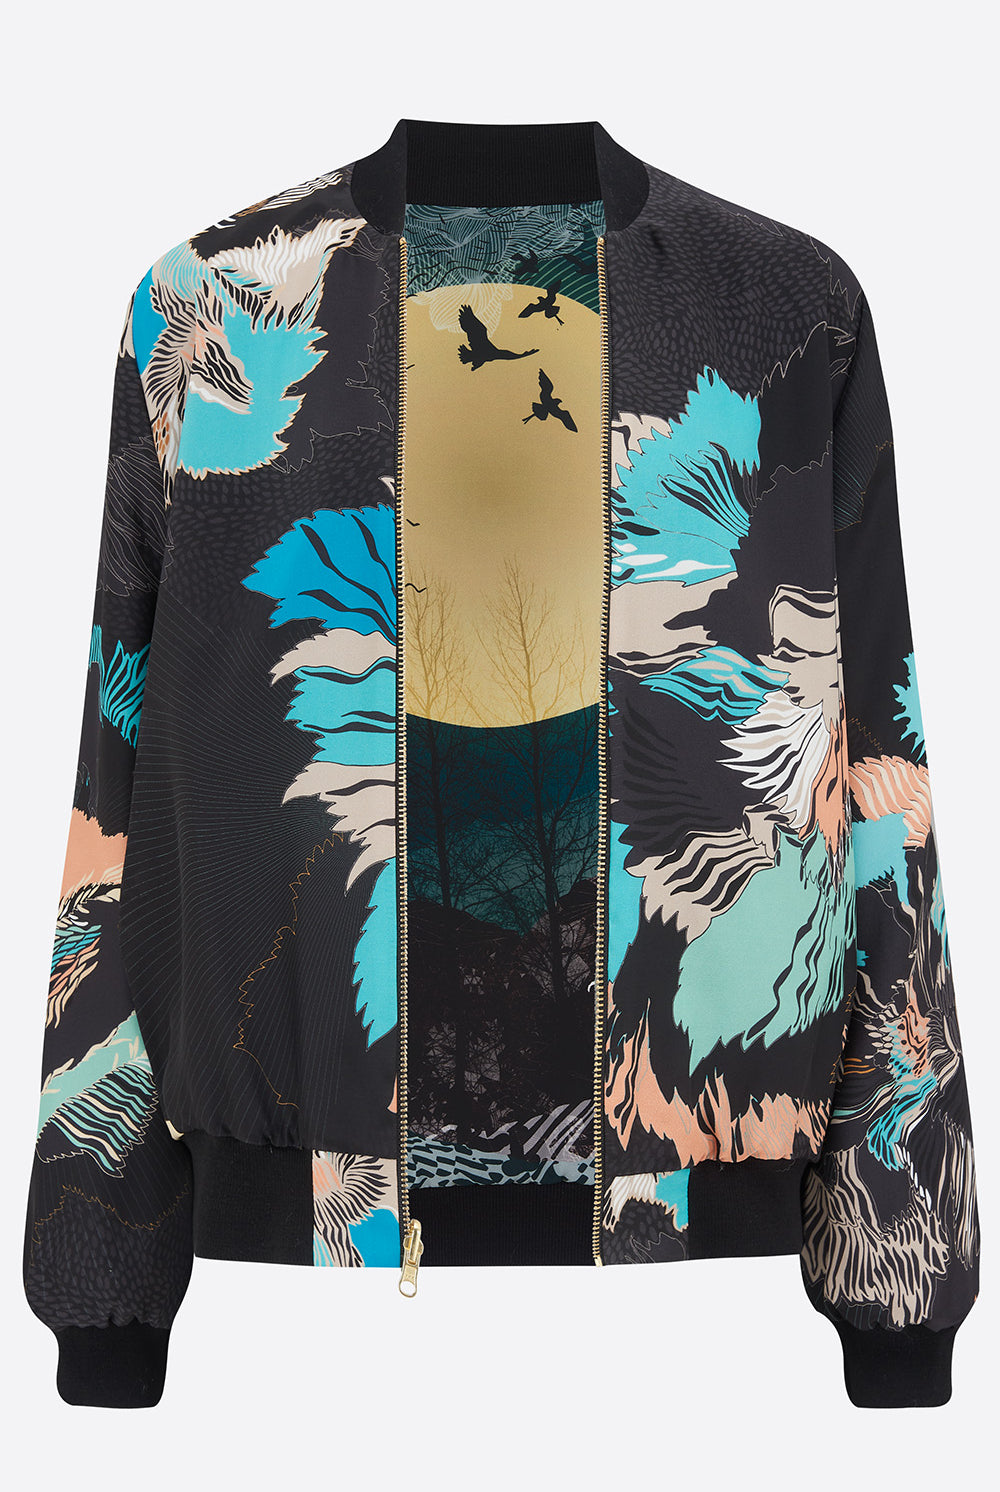 An open reversible silk bomber jacket with florals on one side and an blue moon print on the other